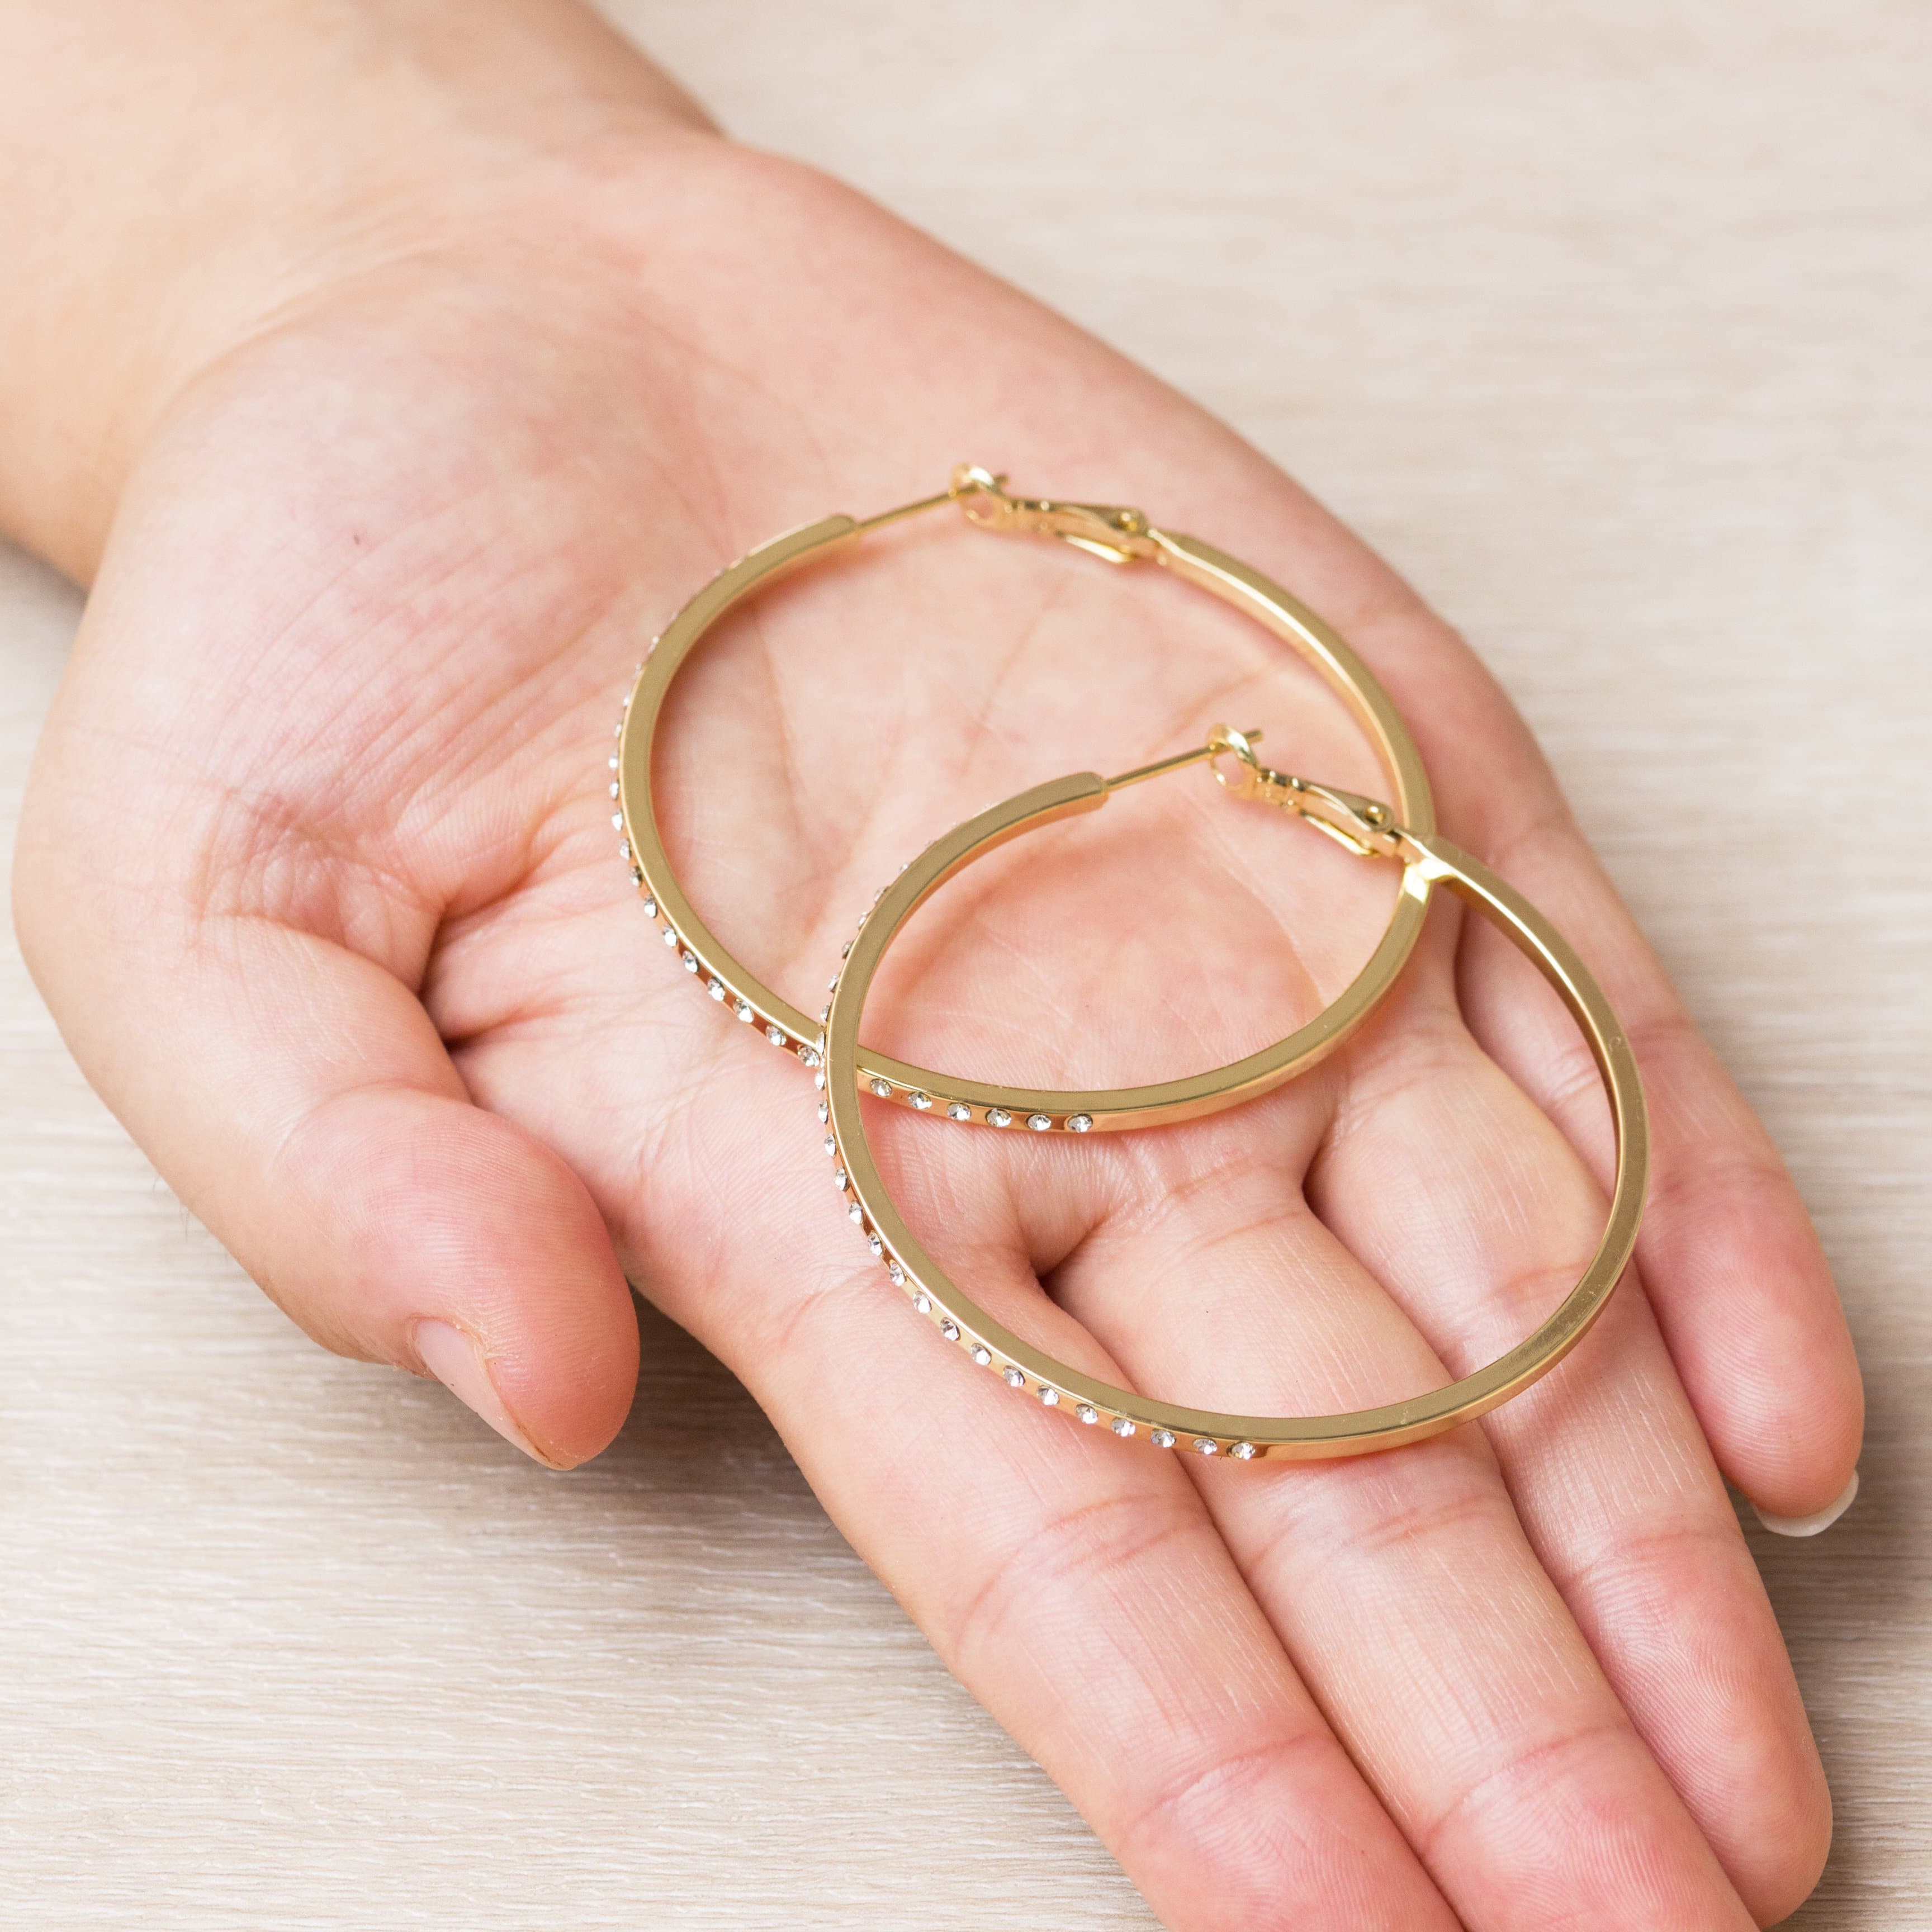 Gold Plated 50mm Hoop Earrings Created with Zircondia® Crystals